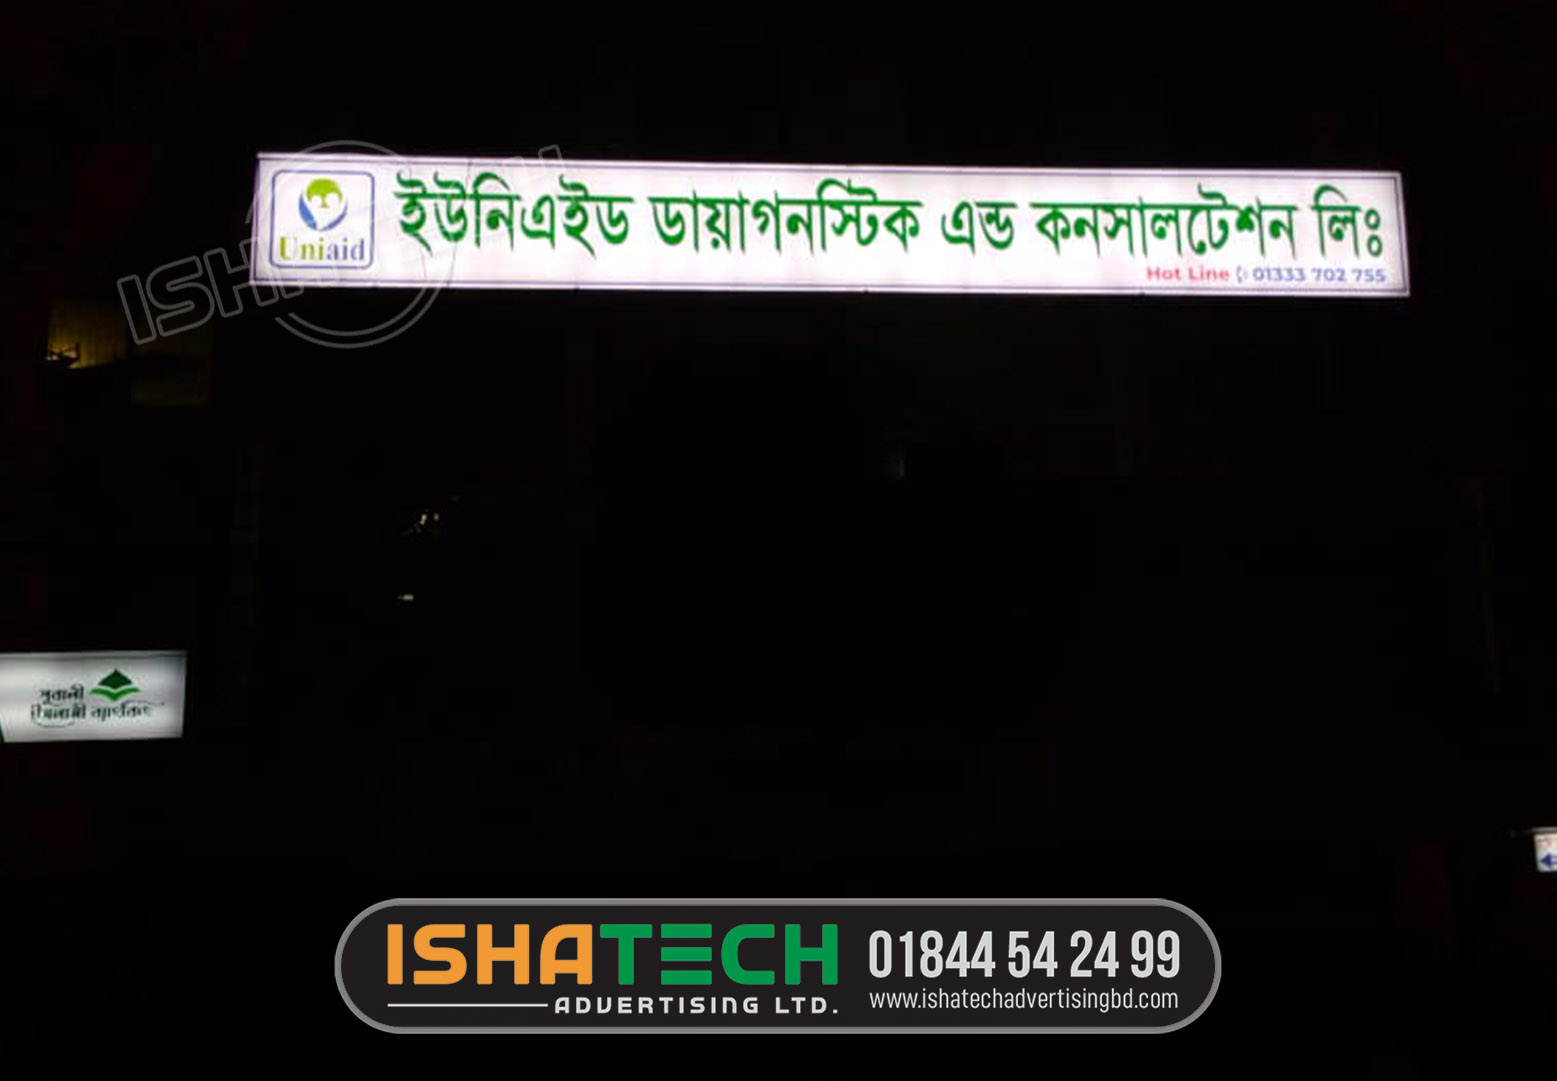 Read more about the article Uniaid Diagnostic and Consultation Outdoor Signboard in Dhaka, Bangladesh.